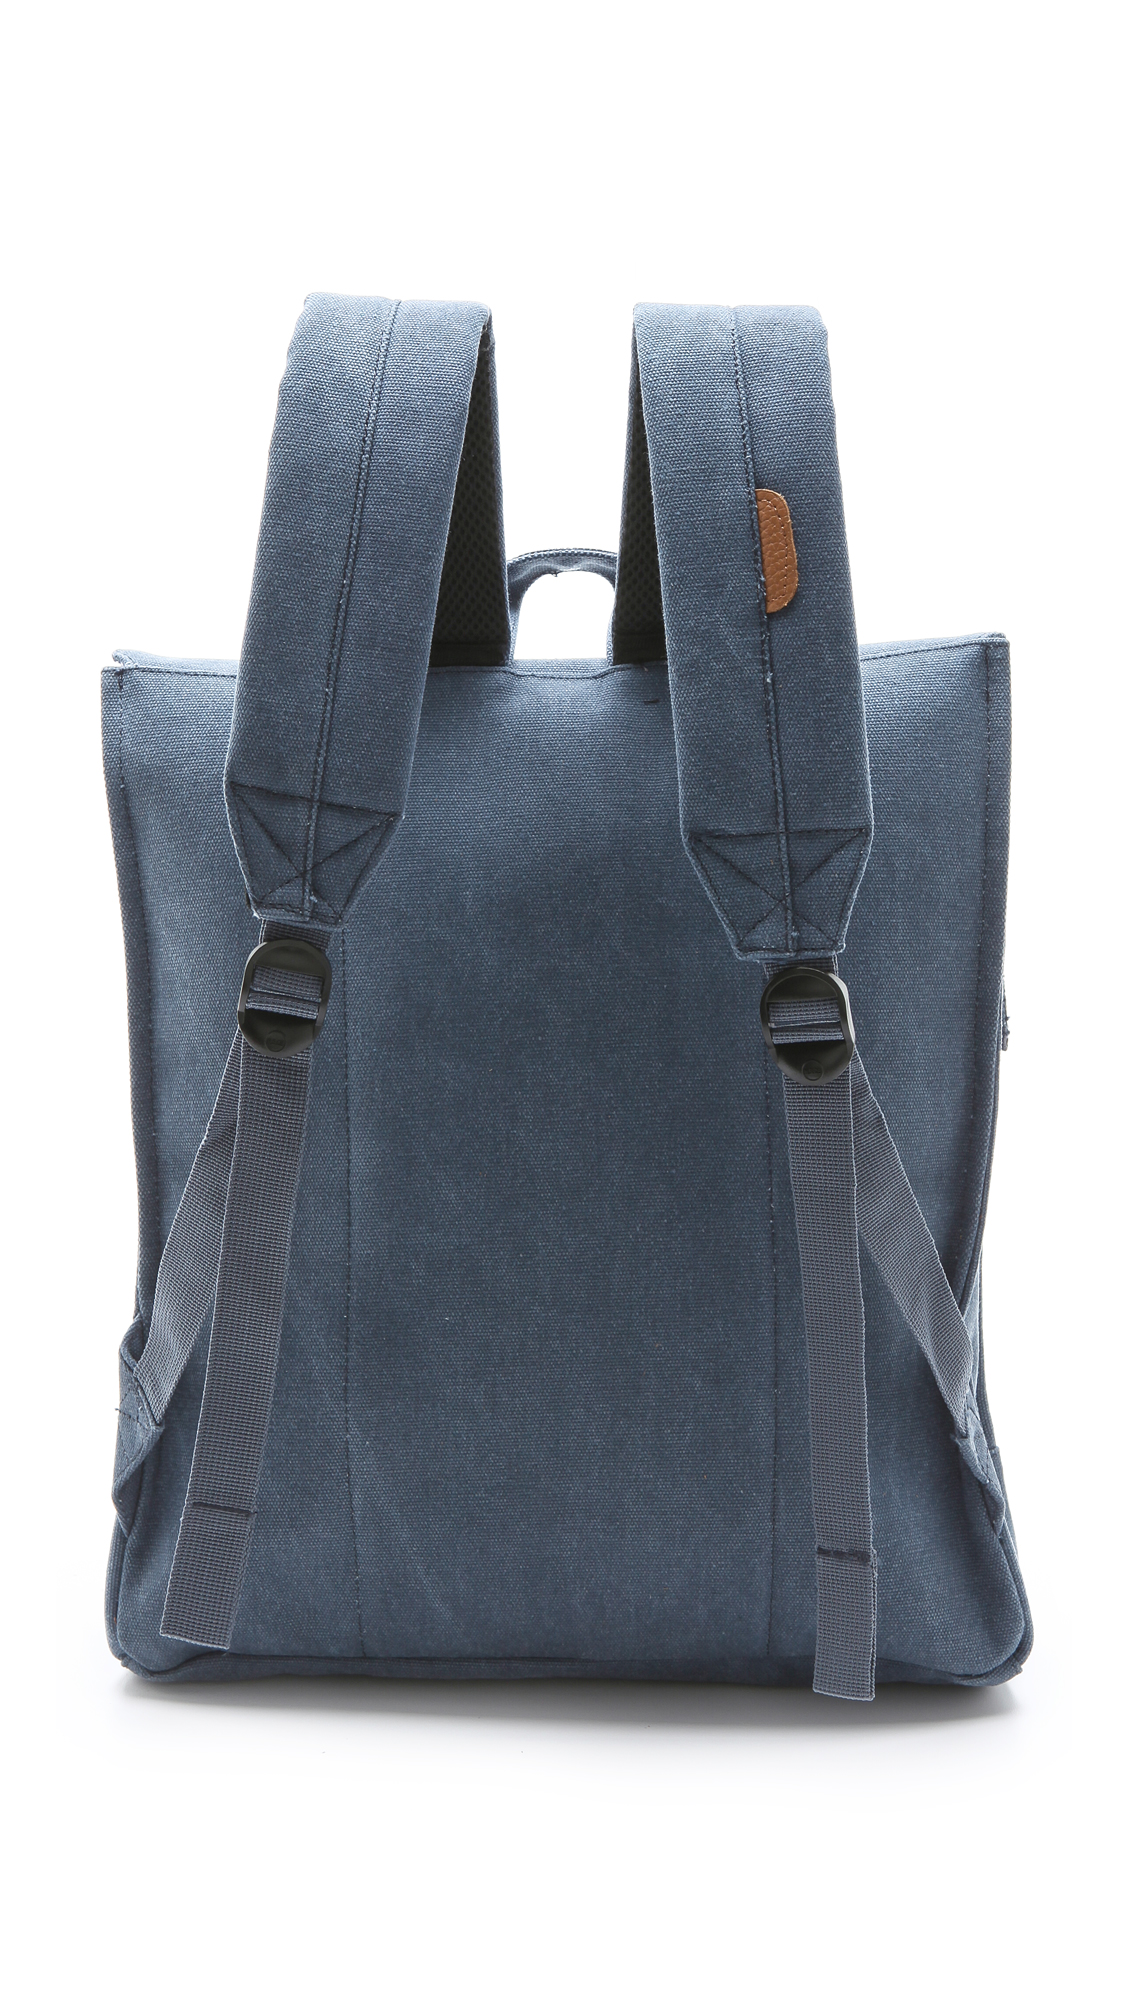 Herschel Supply Co. Survey Backpack in Washed Navy (Blue) - Lyst